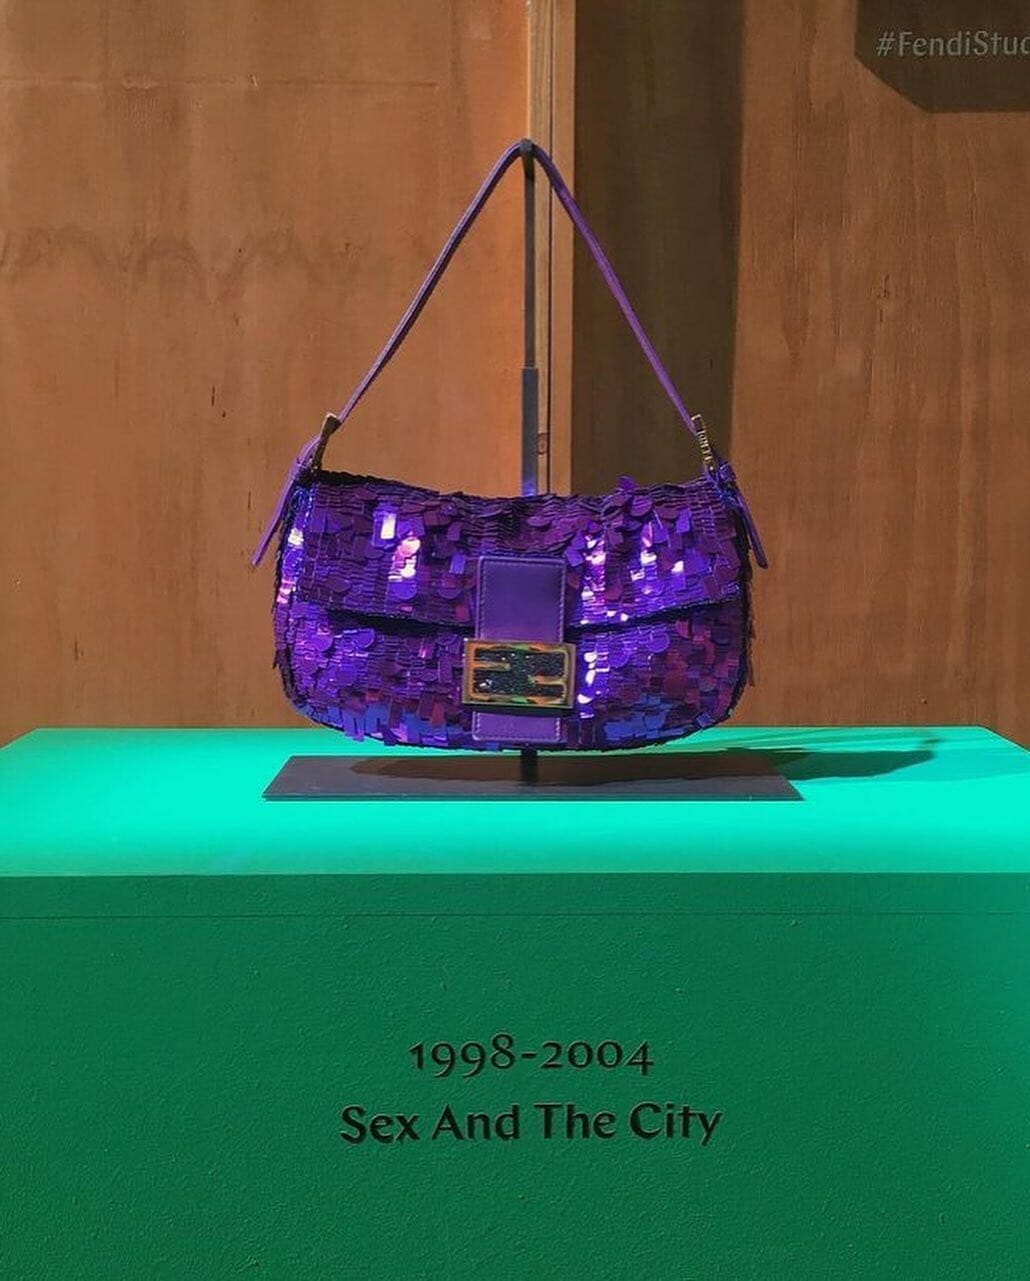 Sex and the city Fendi bag at 25th anniversary Fendi Baguette Bag New York show. RUNWAY MAGAZINE ® Collections. RUNWAY NOW / RUNWAY NEW